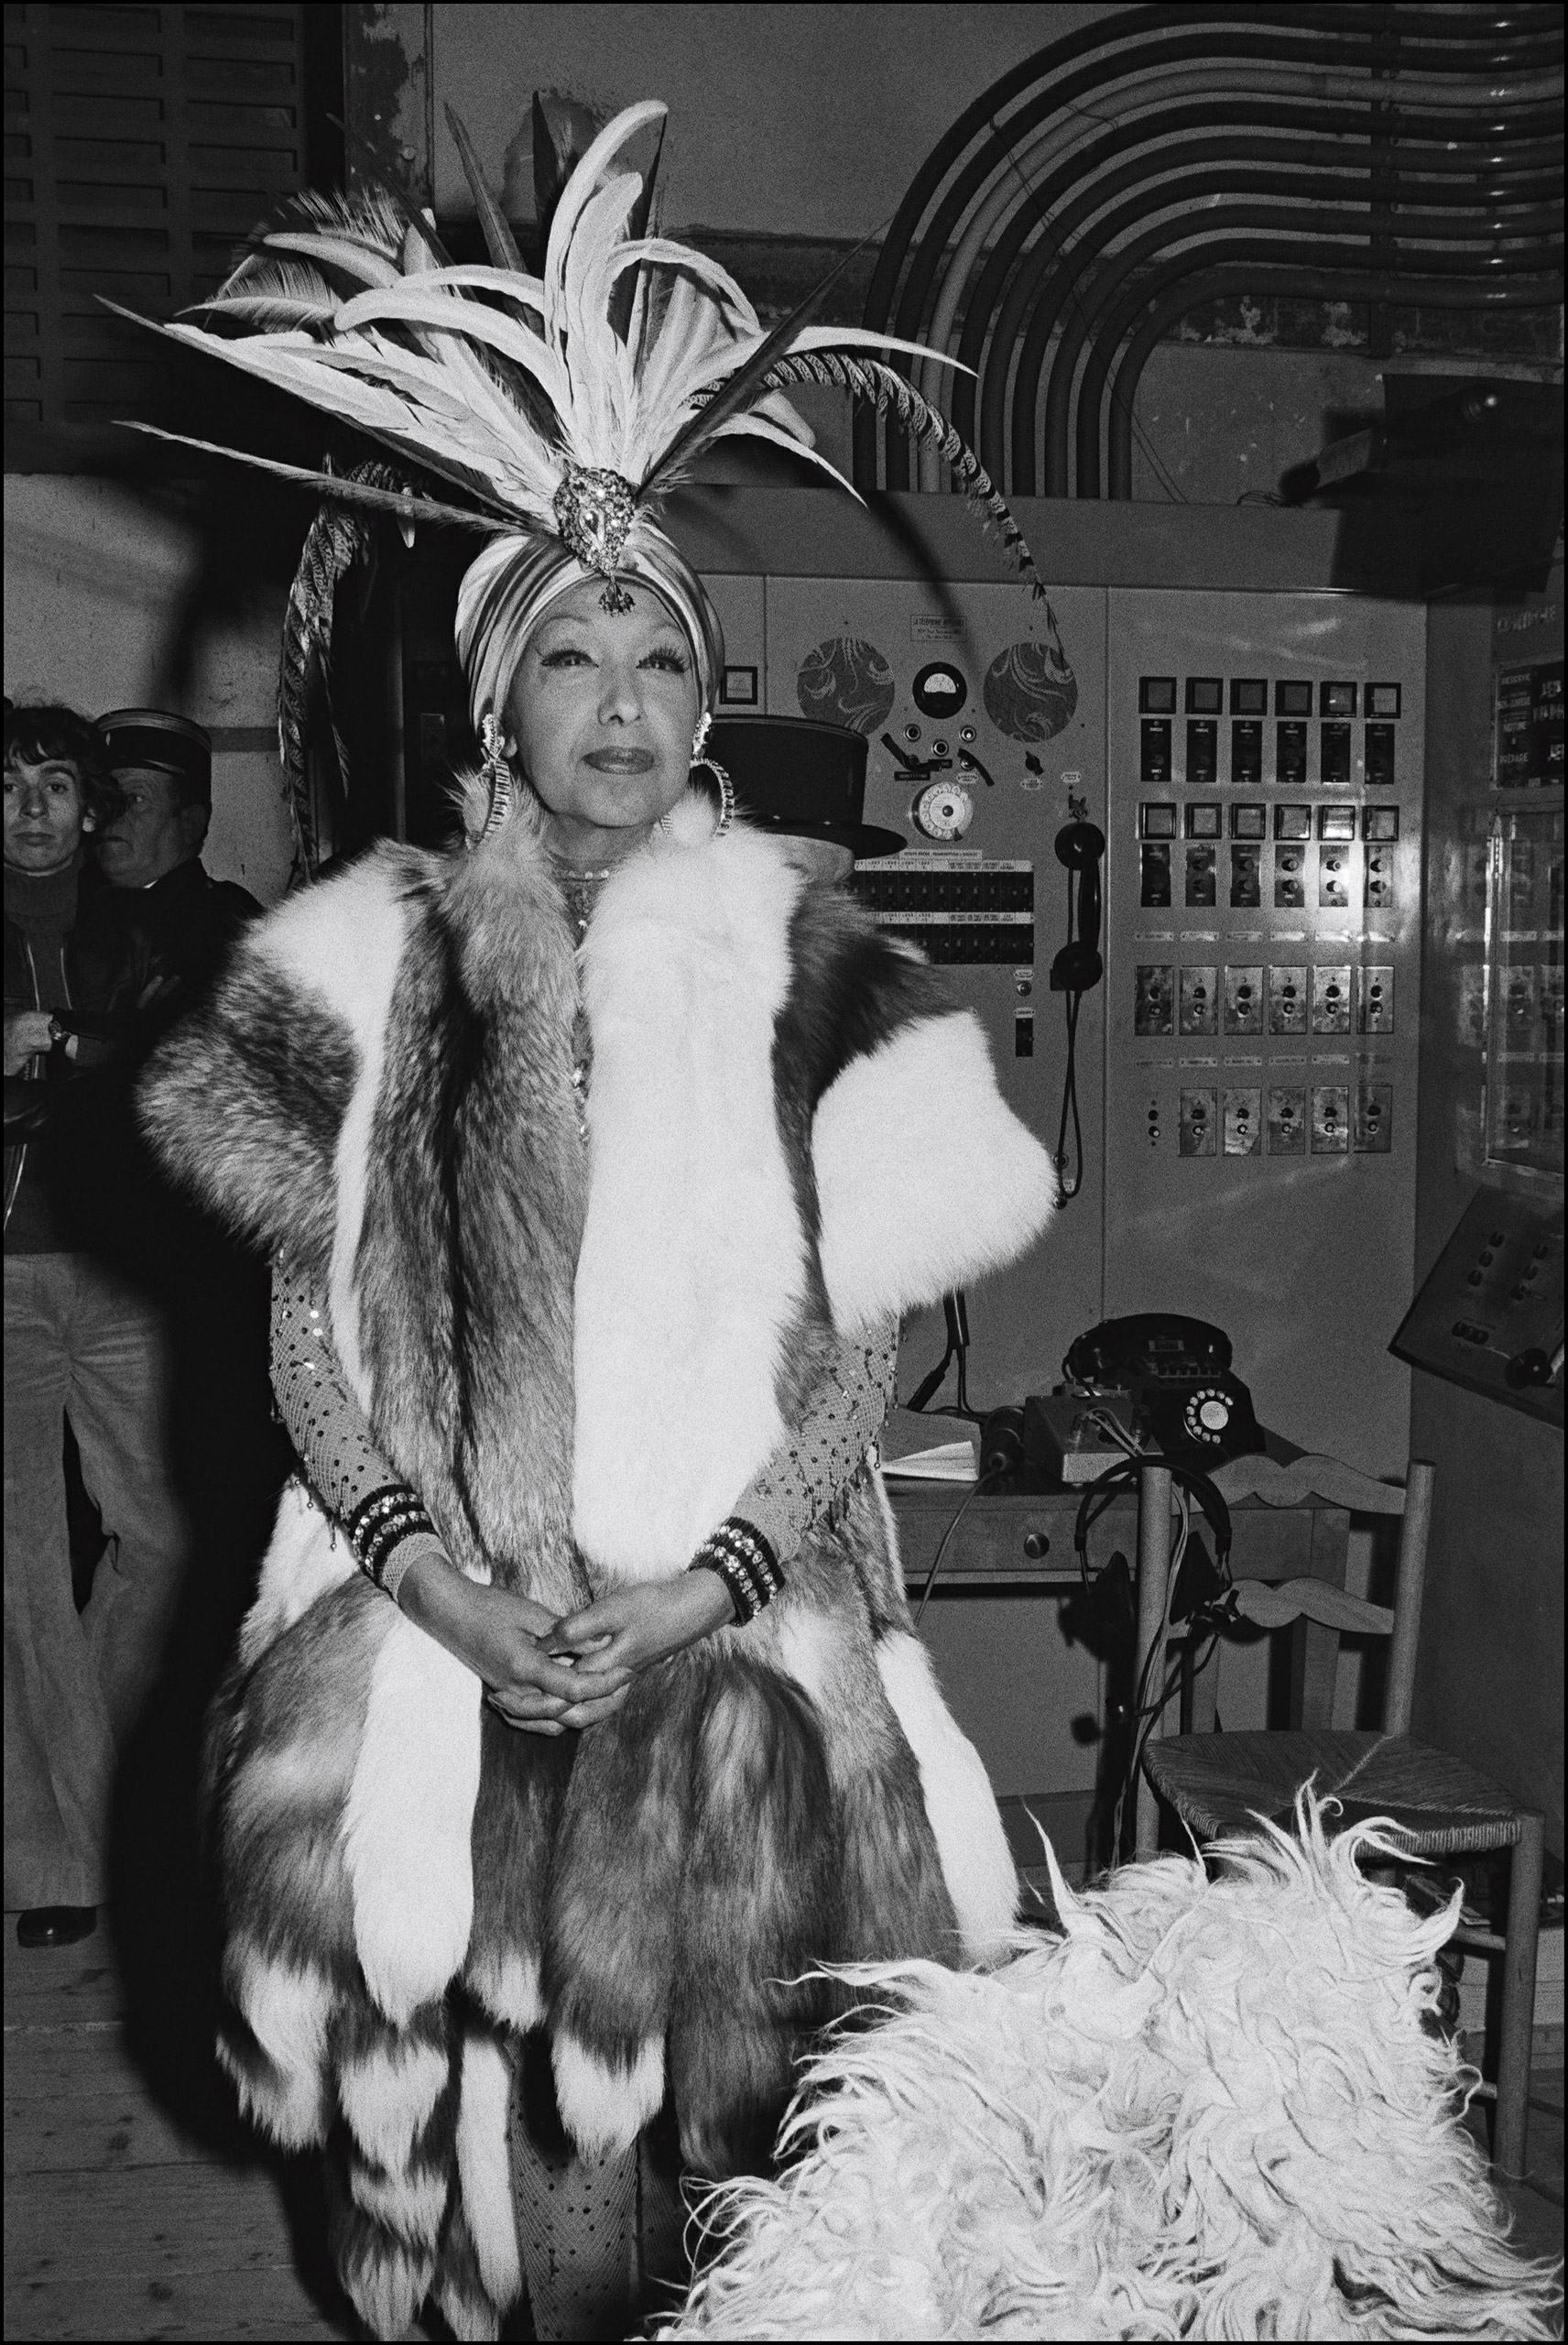 Josephine Baker at a gala organized by the Baroness de Rothschild for the restoration of Versailles castle In France On November 28, 1973.